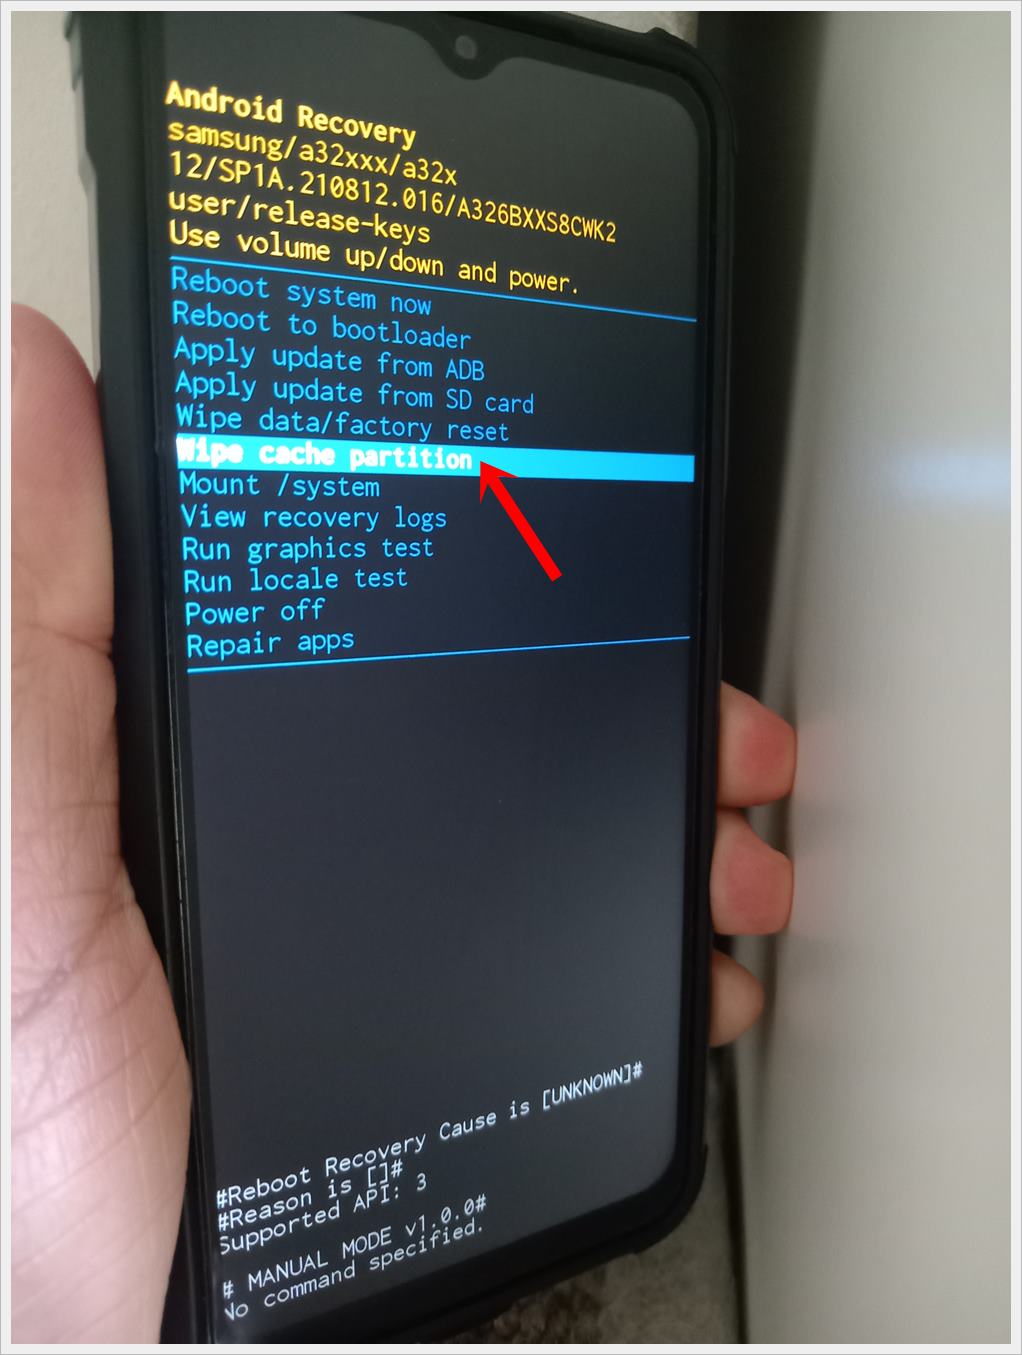 This photo shows a Samsung Galaxy phone displaying the 'Android Recovery' screen, with the 'Wipe Cache Partition' option highlighted.